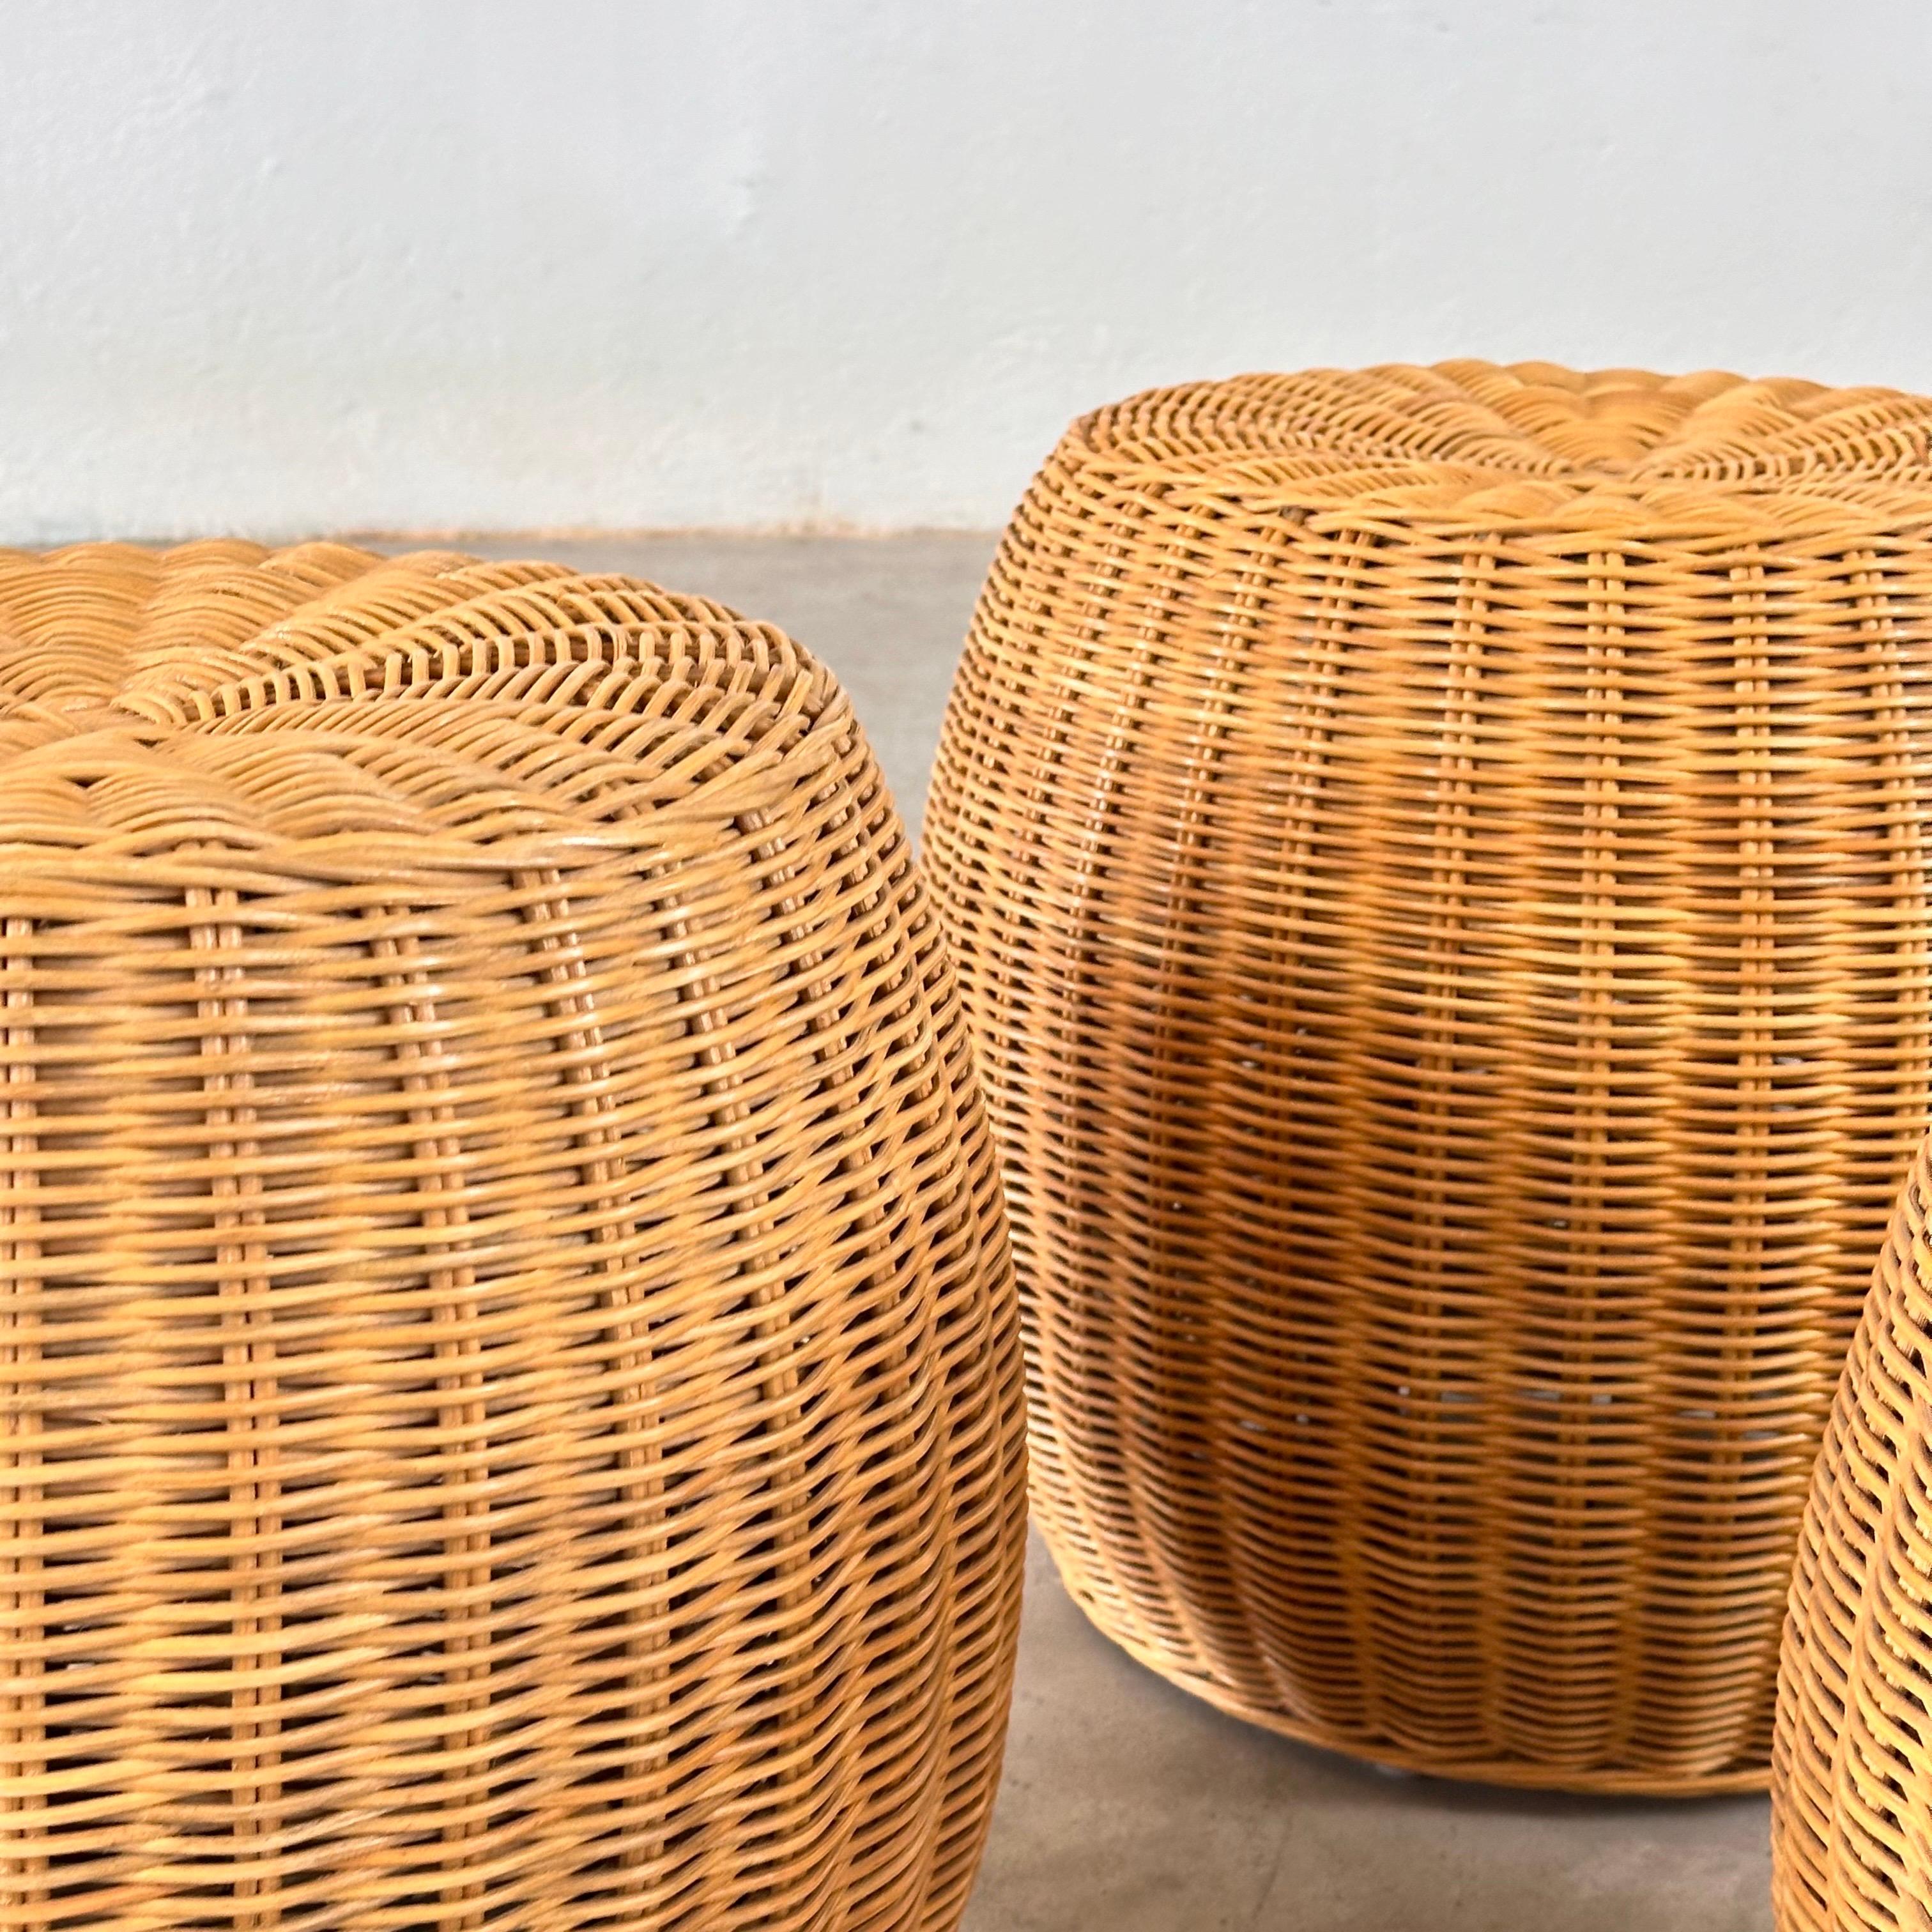 Exquisite Set of Three Wicker Ottoman Poufs, Italy, 1980s For Sale 3